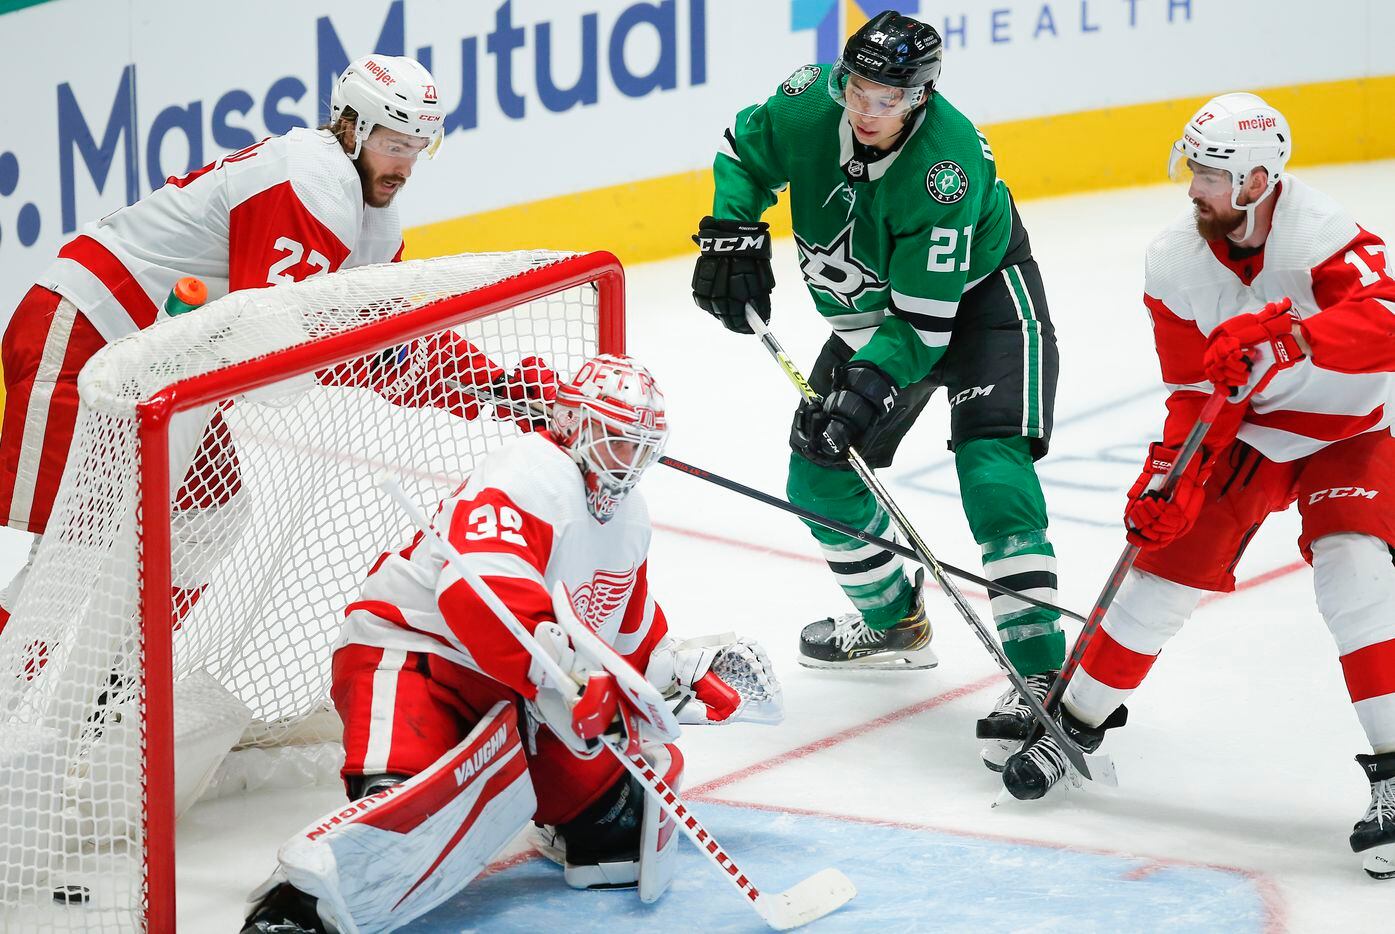 Dallas Stars forward Jason Robertson (21) shoots the puck past Detroit Red Wings goaltender Alex Nedeljkovic (39) for a goal during the third period of an NHL hockey game, Tuesday, November 16, 2021. Dallas won 5-2. (Brandon Wade/Special Contributor)